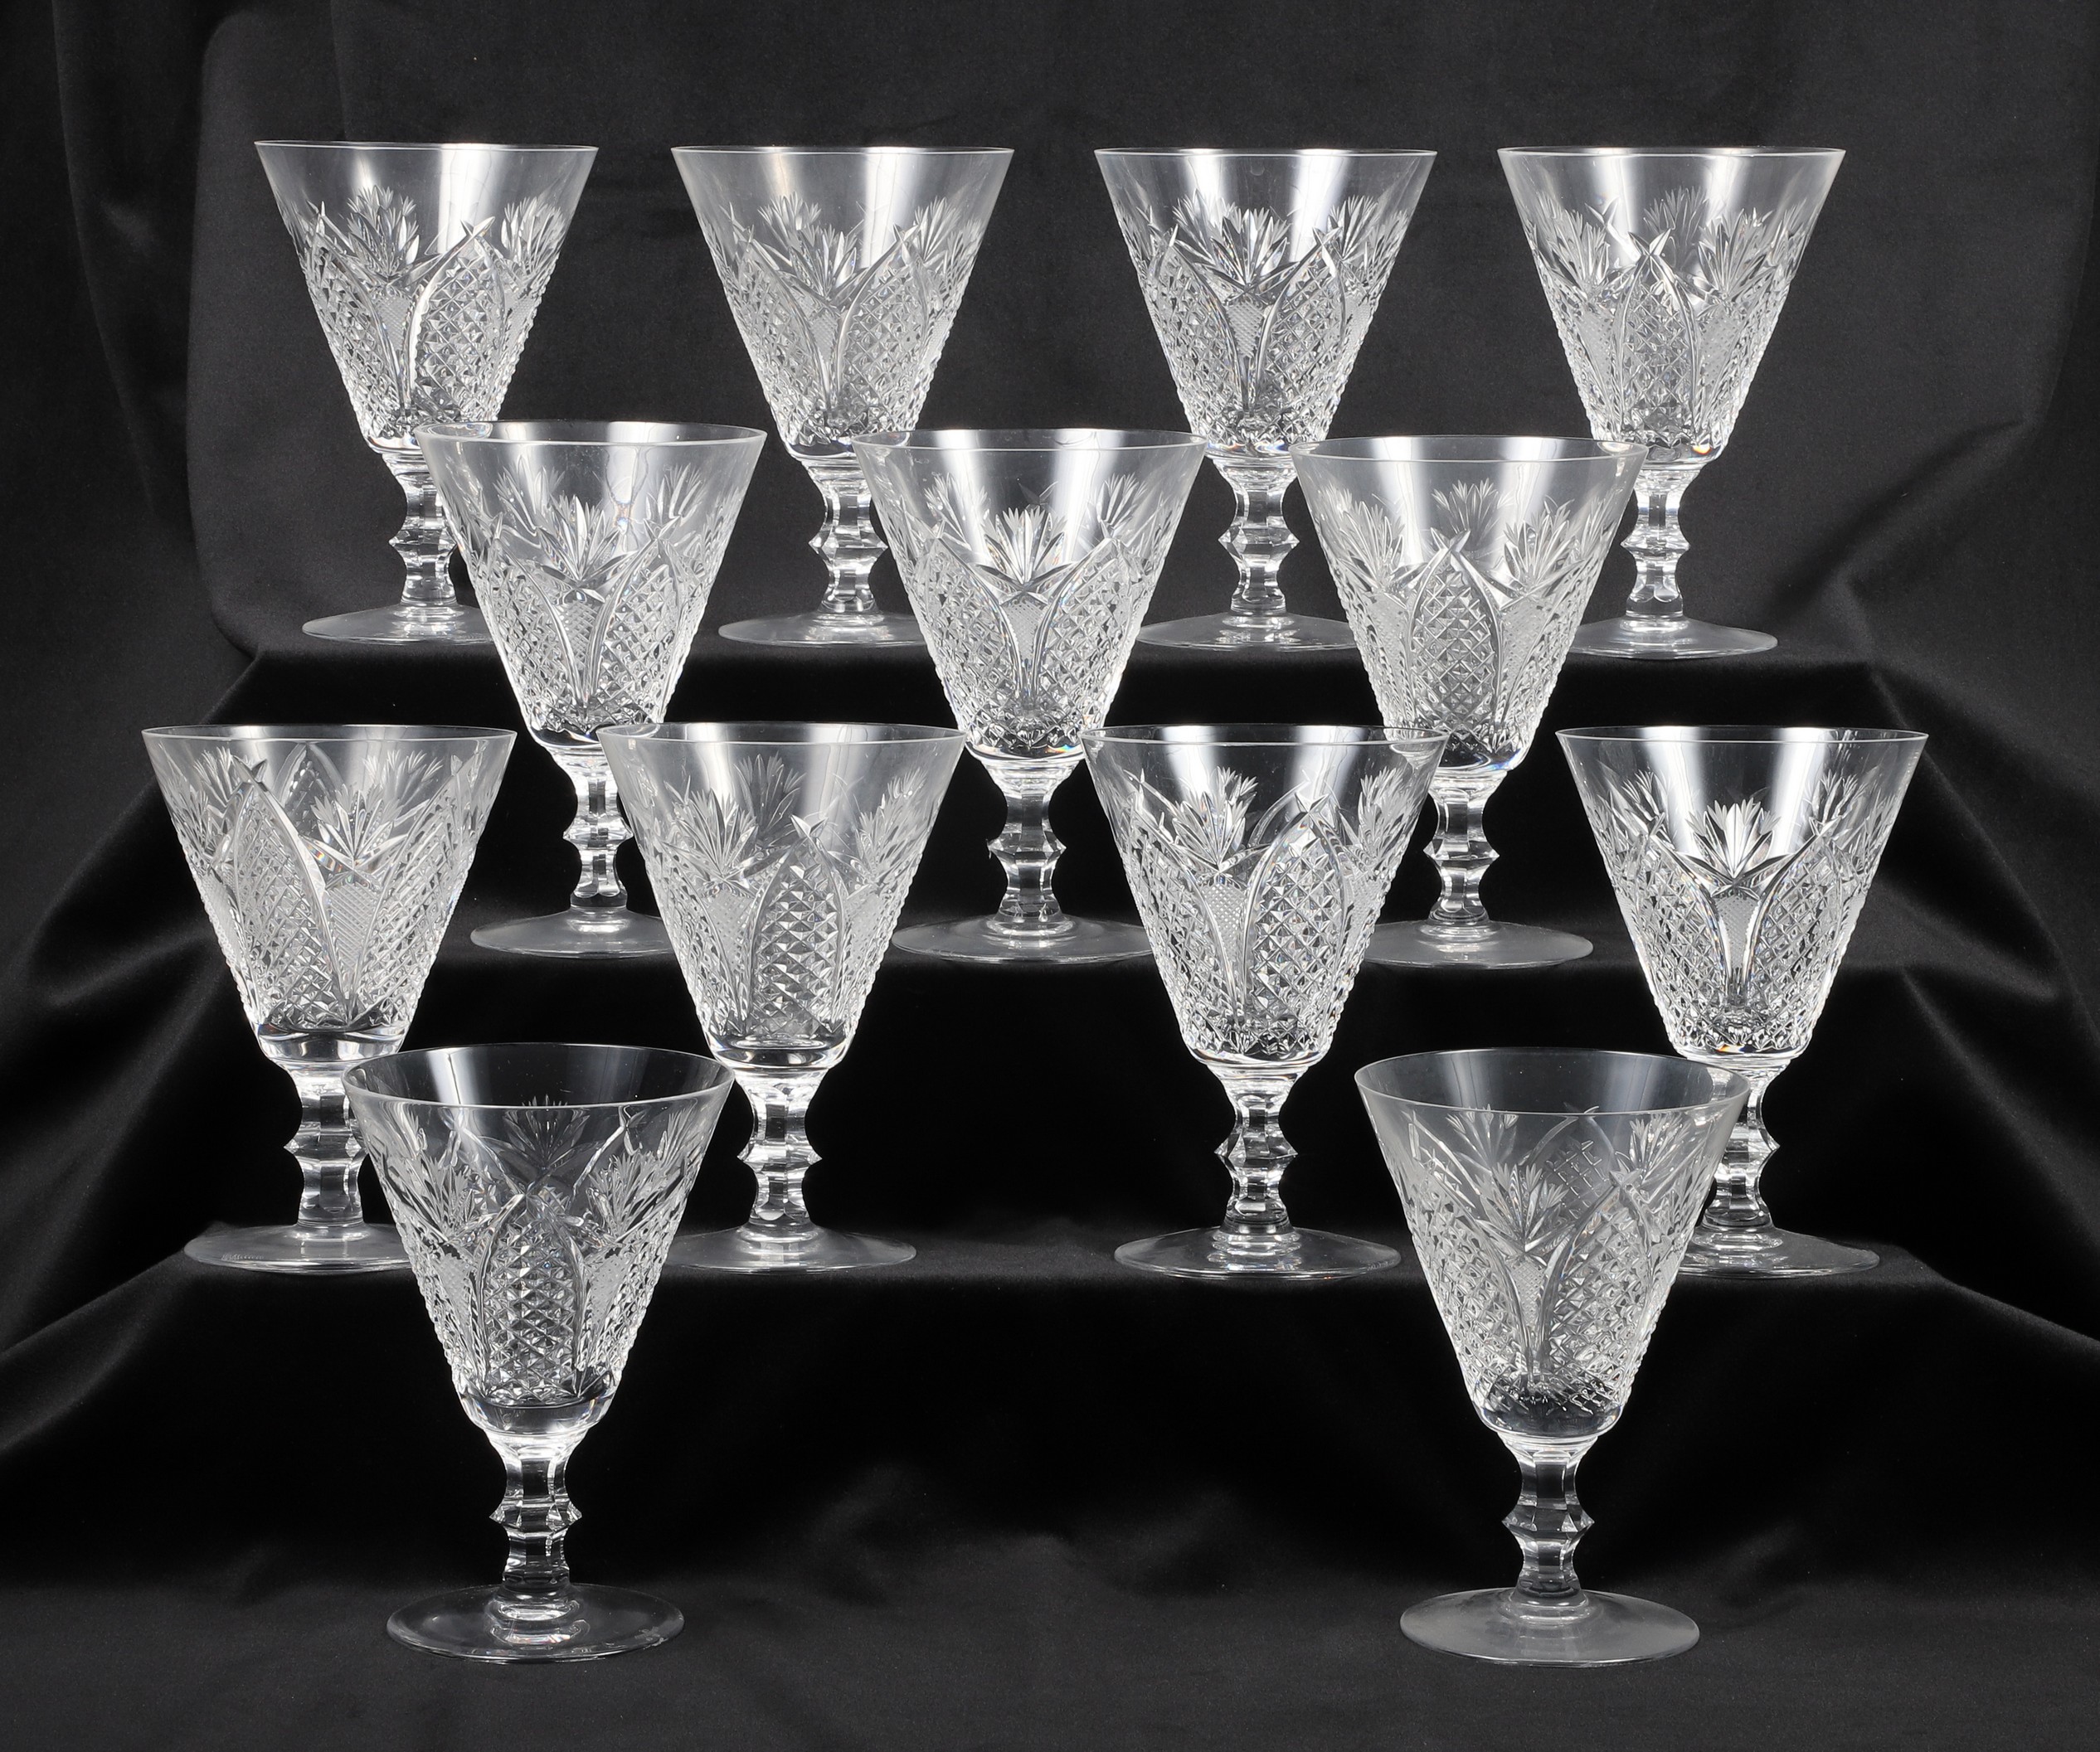  13 Waterford Dunmore water goblets  2e07a7